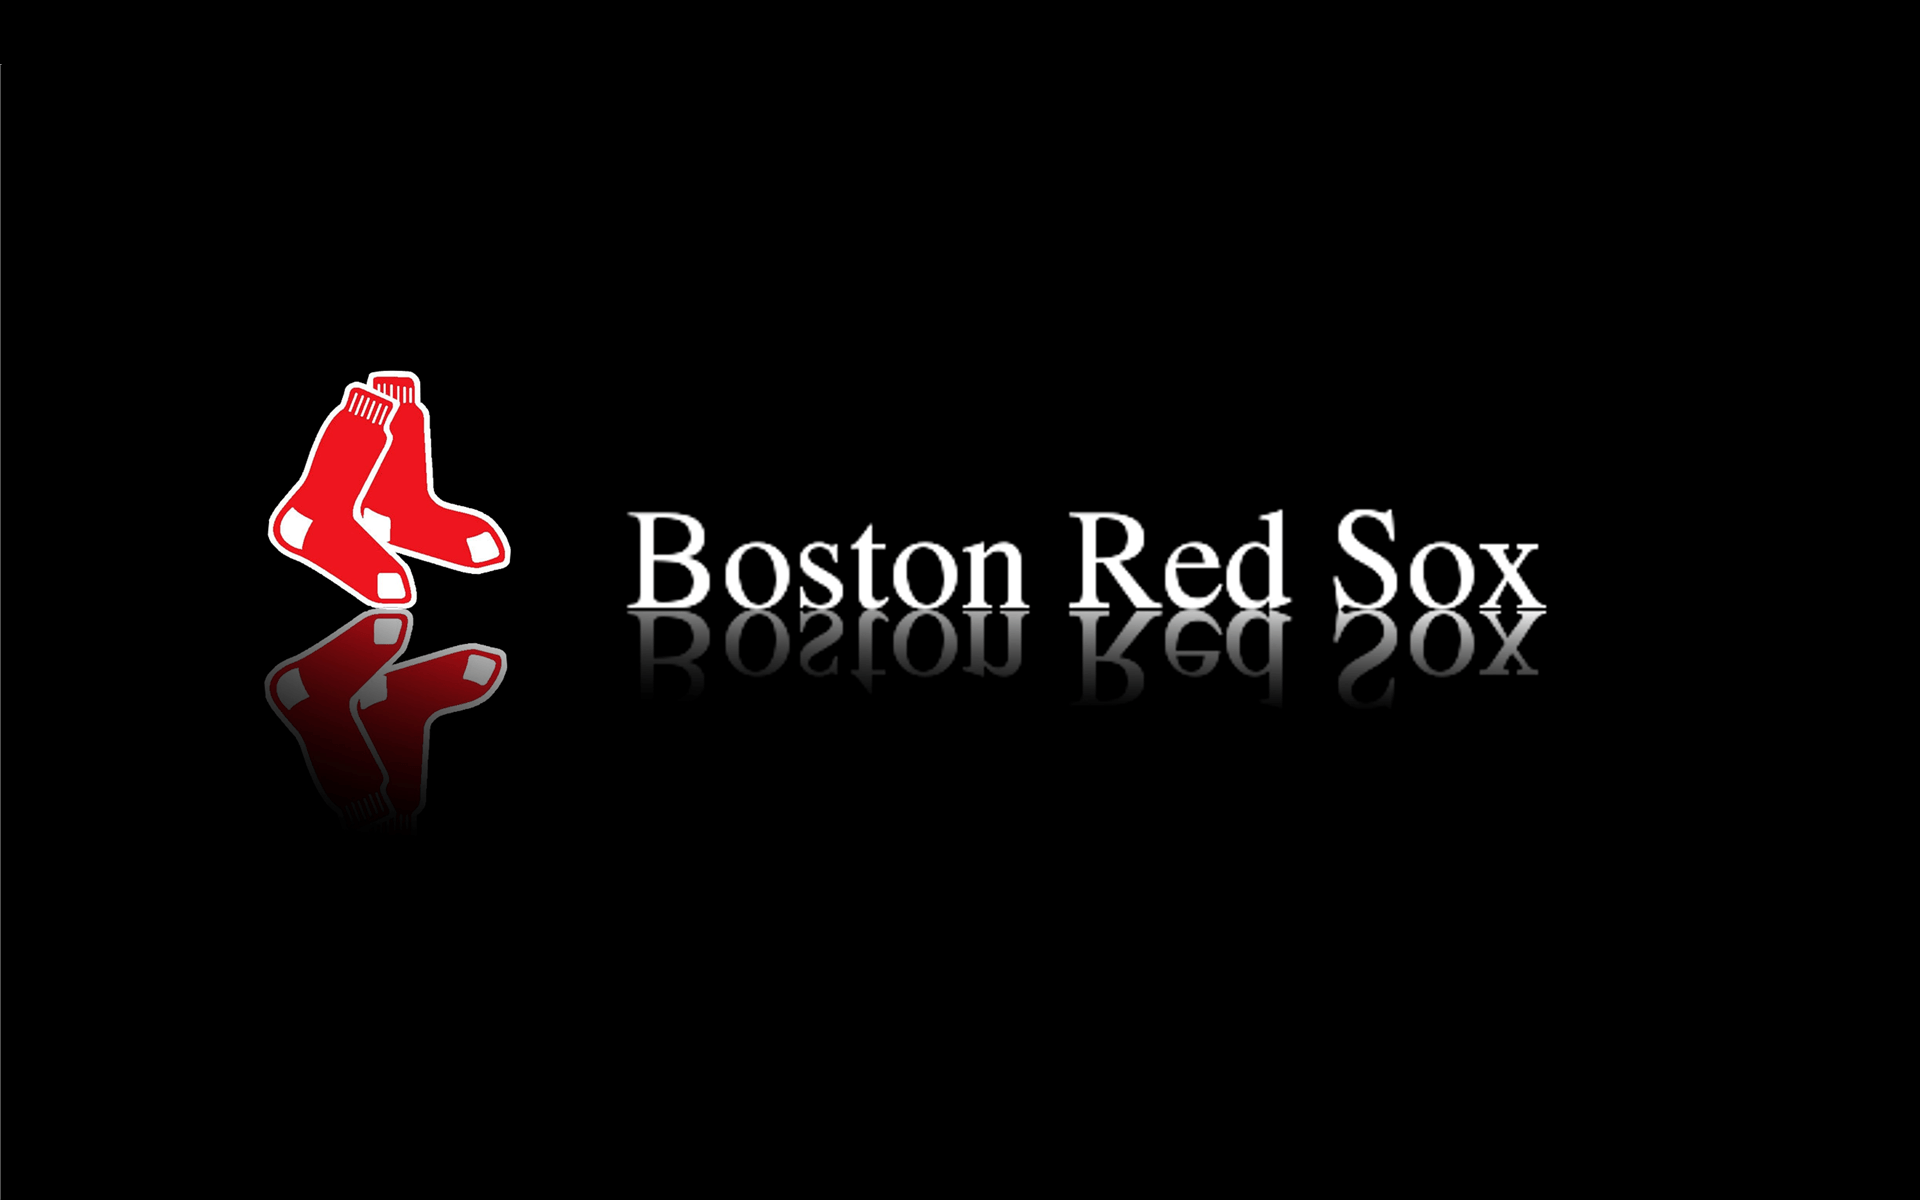 Related Picture Boston Red Sox Logo 1920x1080 Wallpaper Car Picture